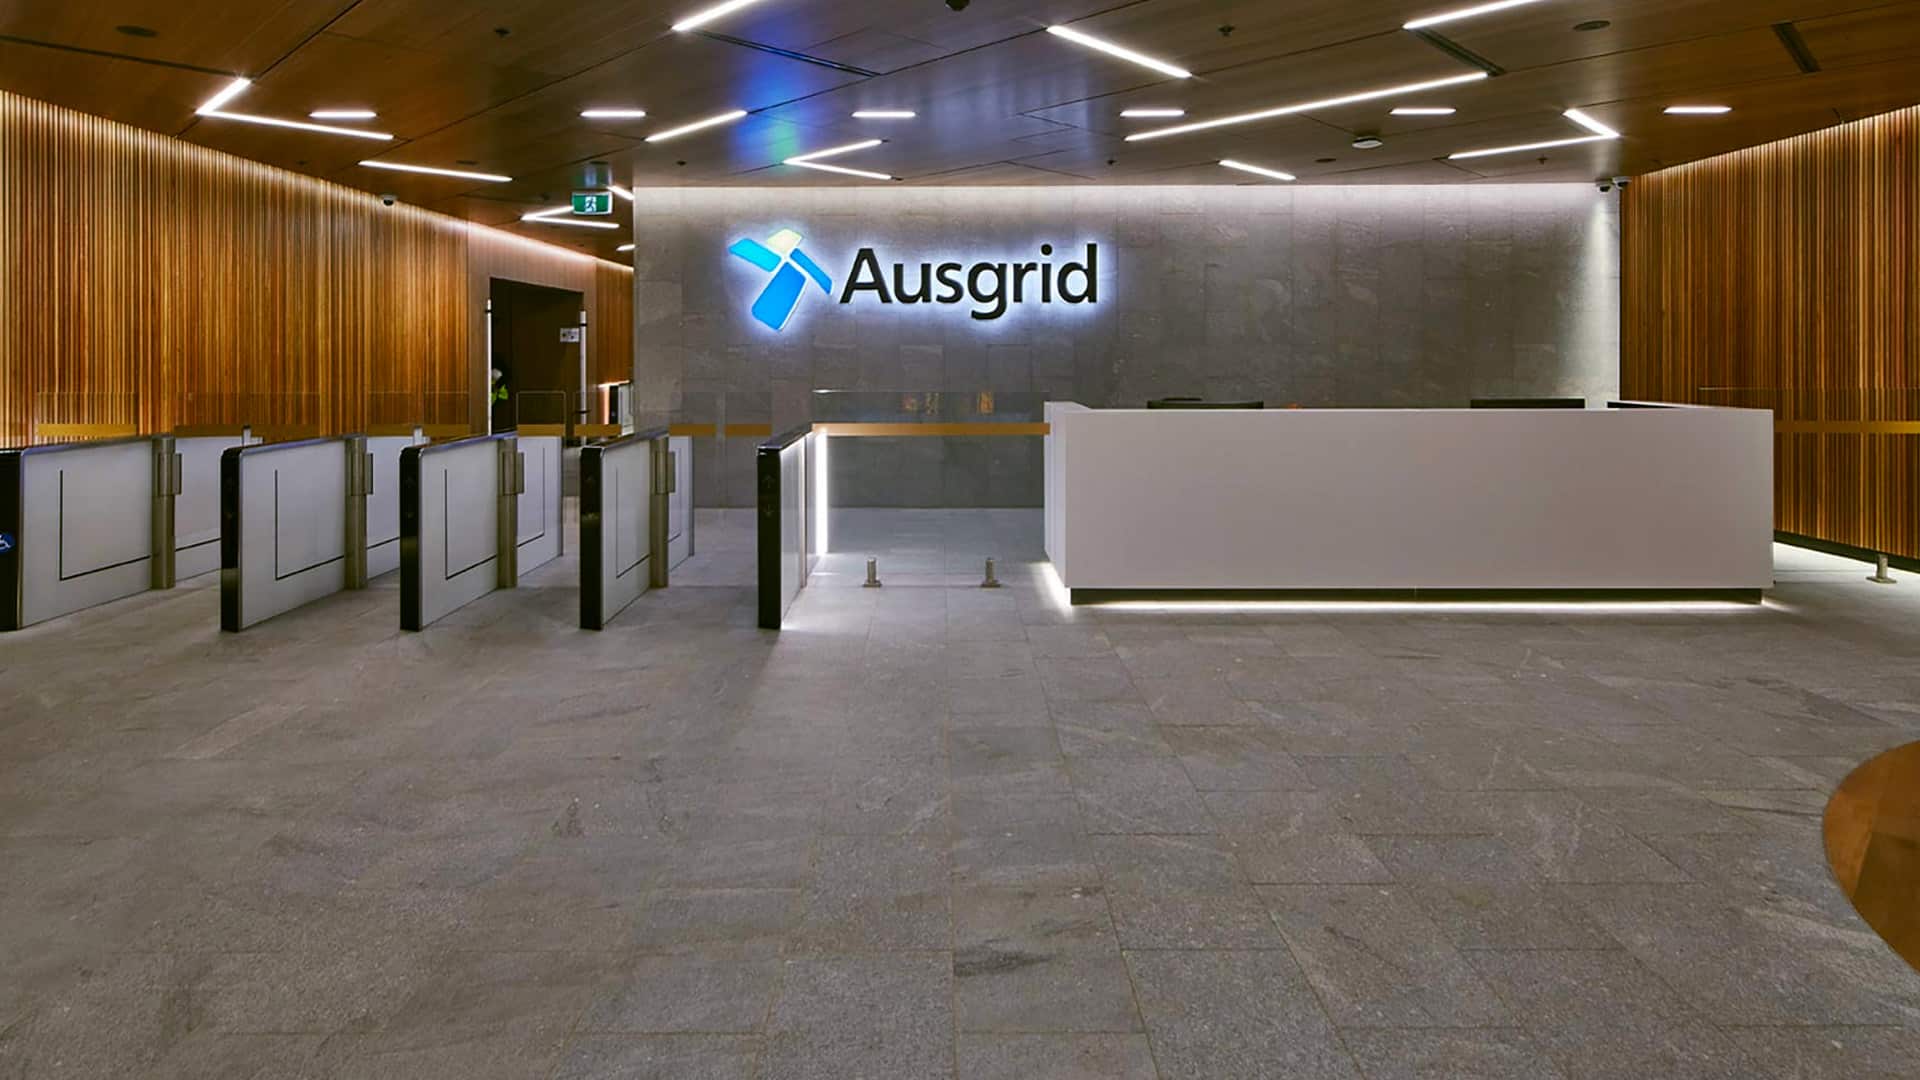 Infosys, Microsoft ink multi-year deal with Ausgrid